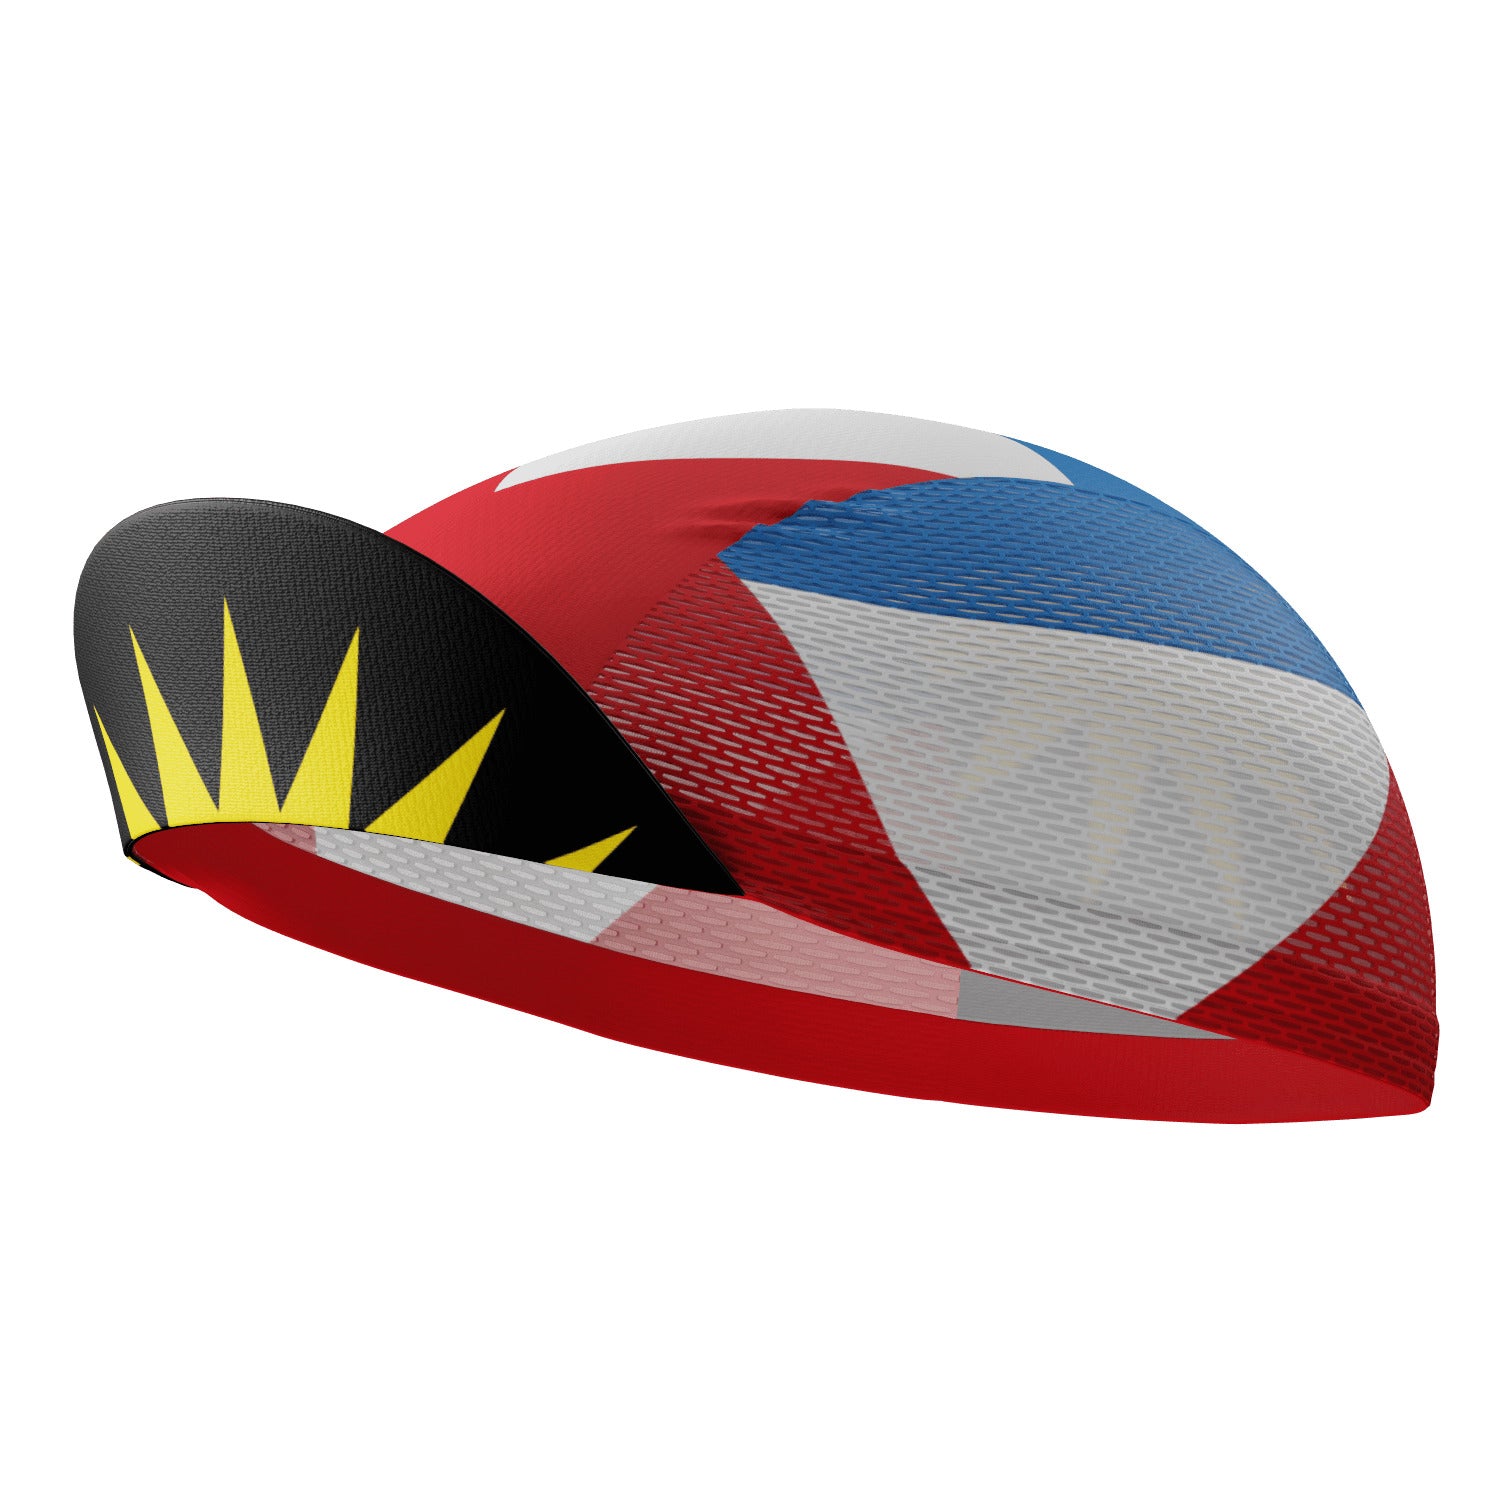 Unisex Antigua and Barbuda National Flag Quick Dry Cycling Cap